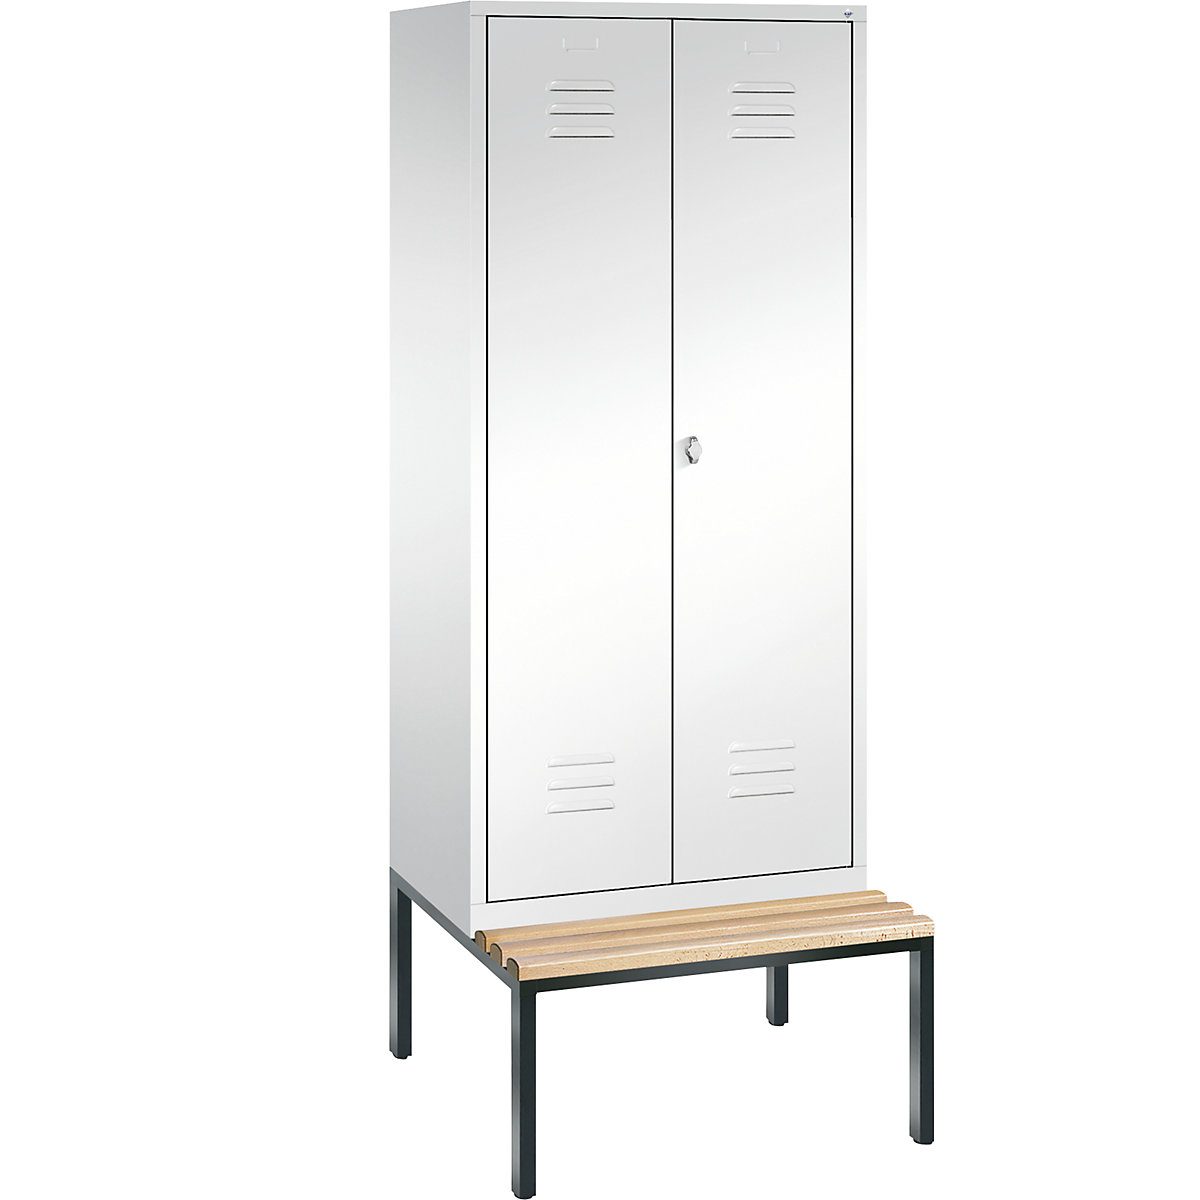 CLASSIC cloakroom locker with bench mounted underneath, doors close in the middle - C+P